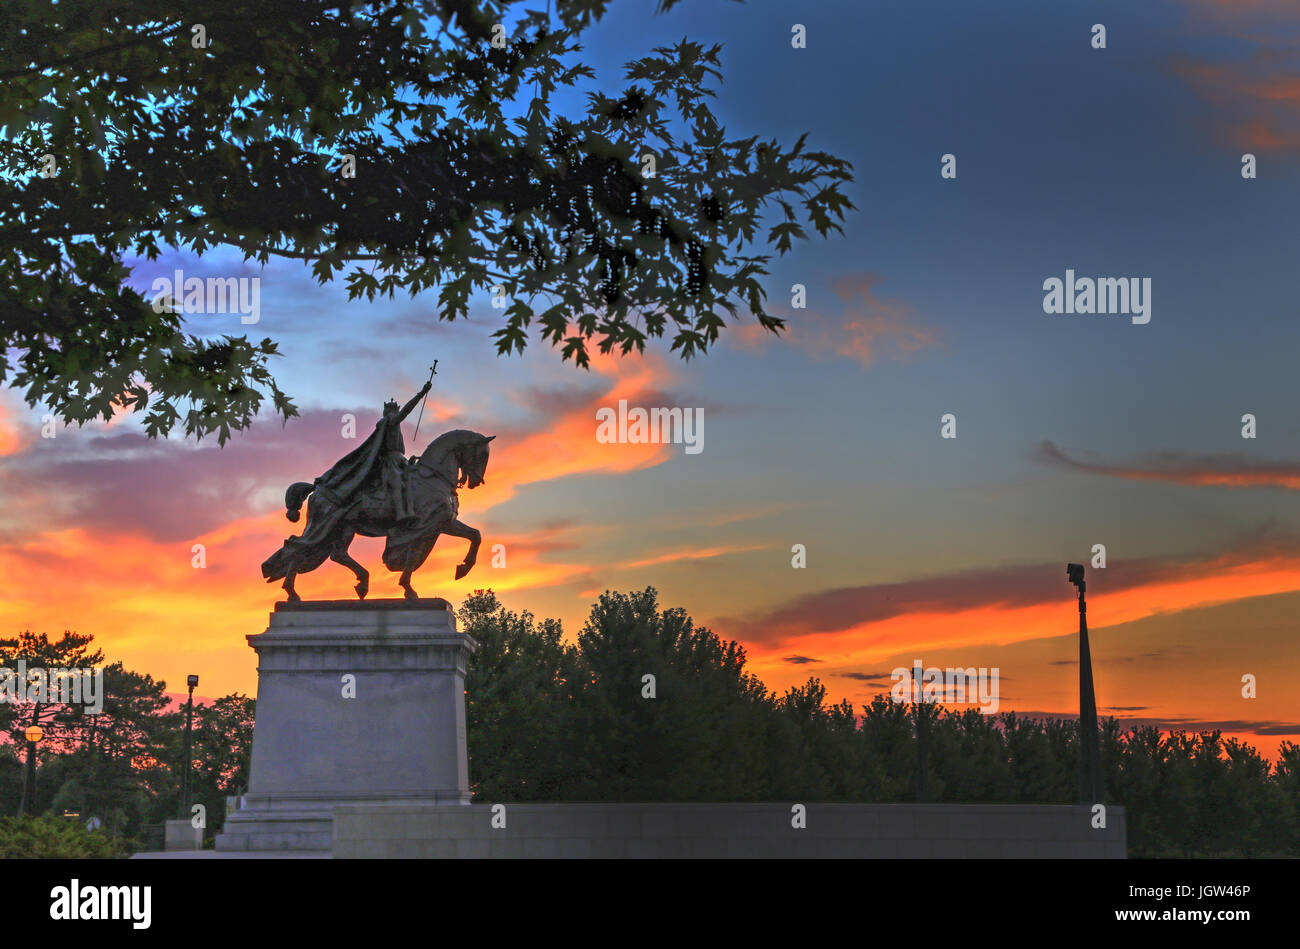 The sunset over the Apotheosis of St. Louis statue of King Louis IX of France, namesake of St. Louis, Missouri in Forest Park, St. Louis, Missouri. Stock Photo